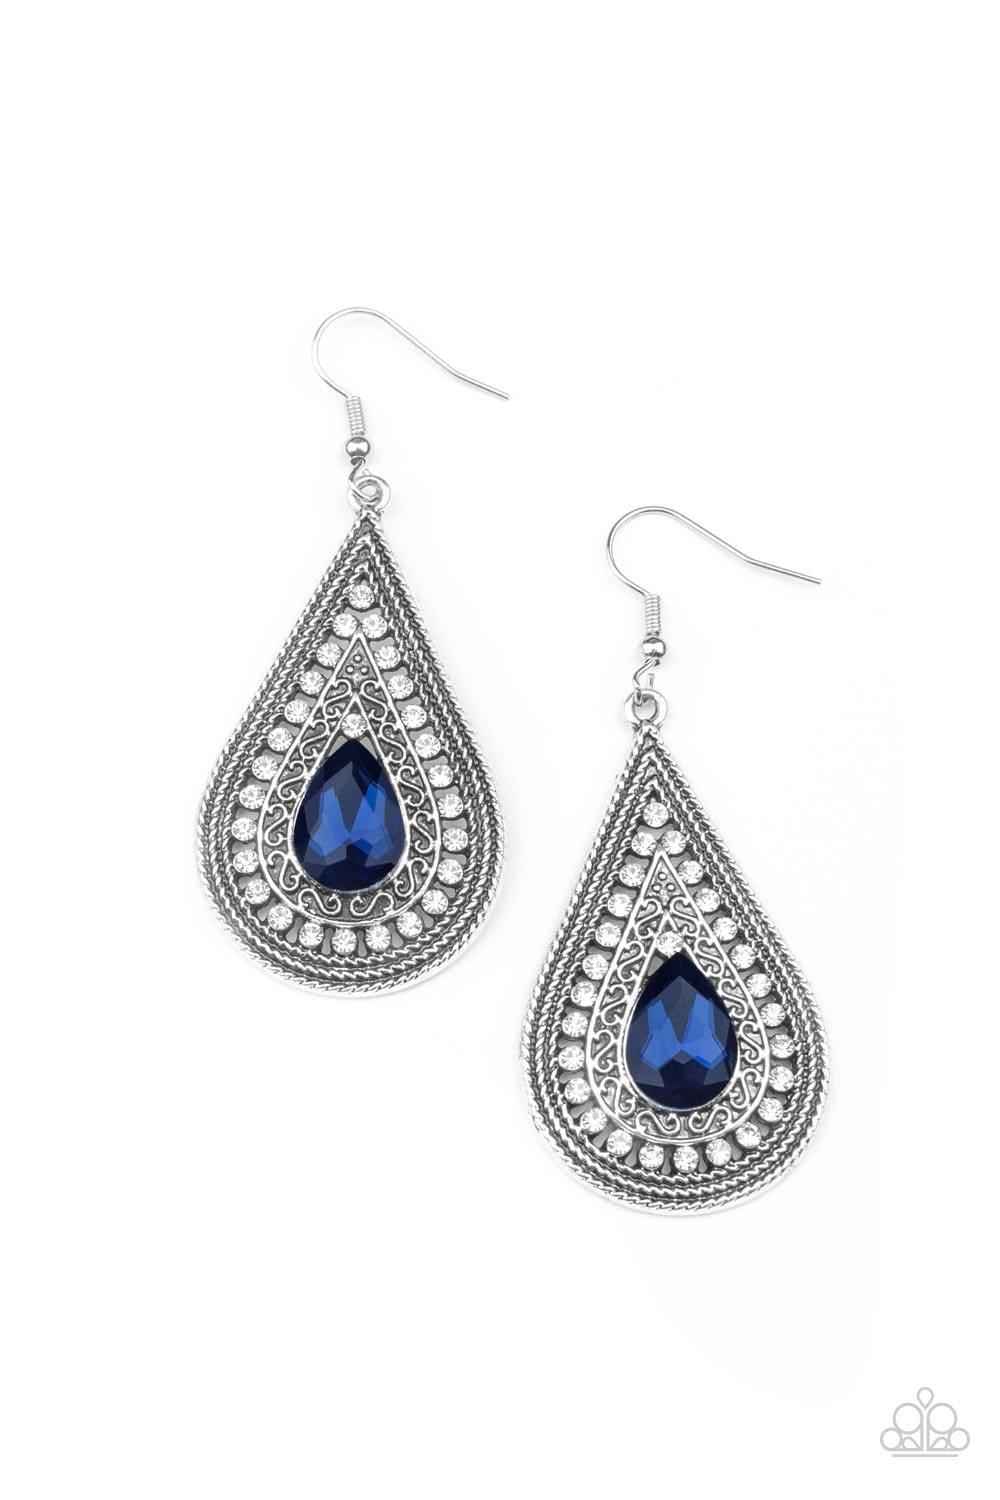 Paparazzi Accessories - Metro Masquerade - Blue Earrings - Bling by JessieK